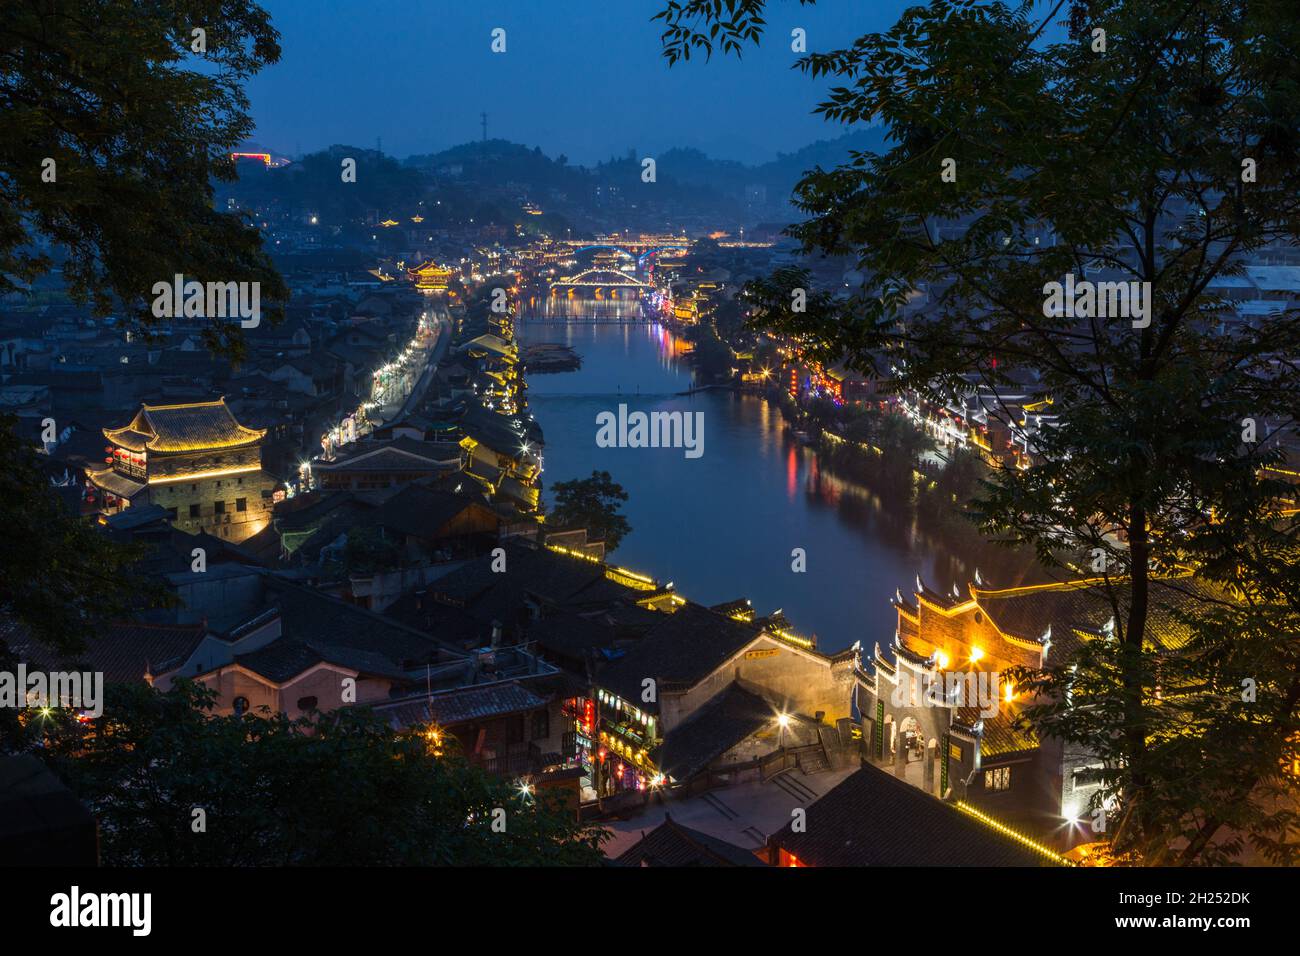 Bridges over the Tuojiang River lit up at night in Fenghuang, China. Stock Photo